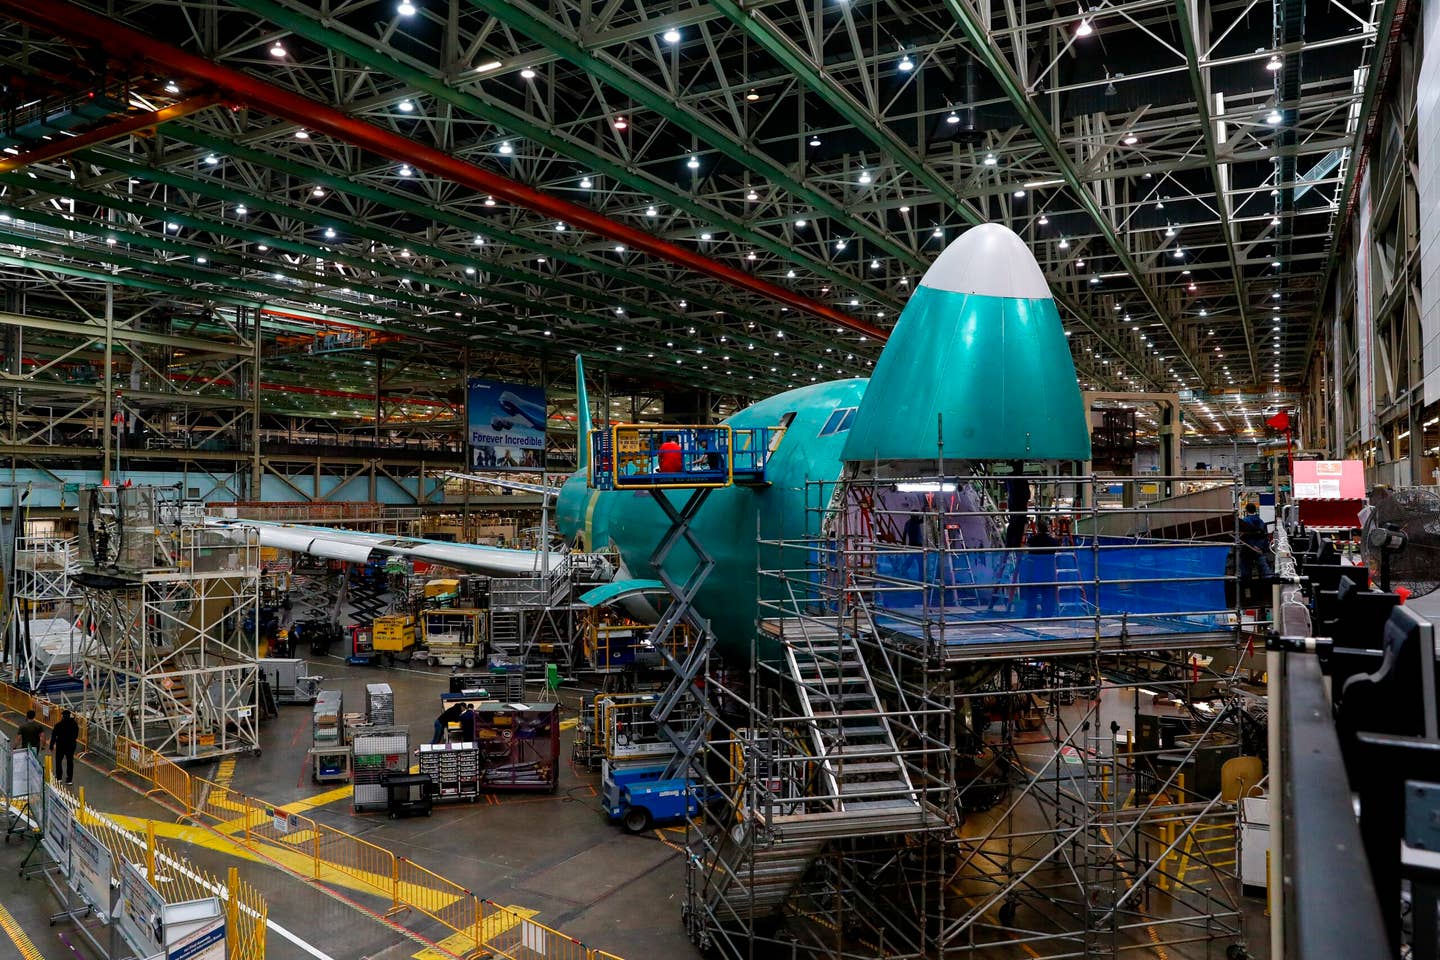 Workers assemble the third to last Boeing 747 aircraft at Boeing's Everett Production Facility Wednesday, June 15, 2022 in Everett, Wash. (Jennifer Buchanan/The Seattle Times via AP, Pool)